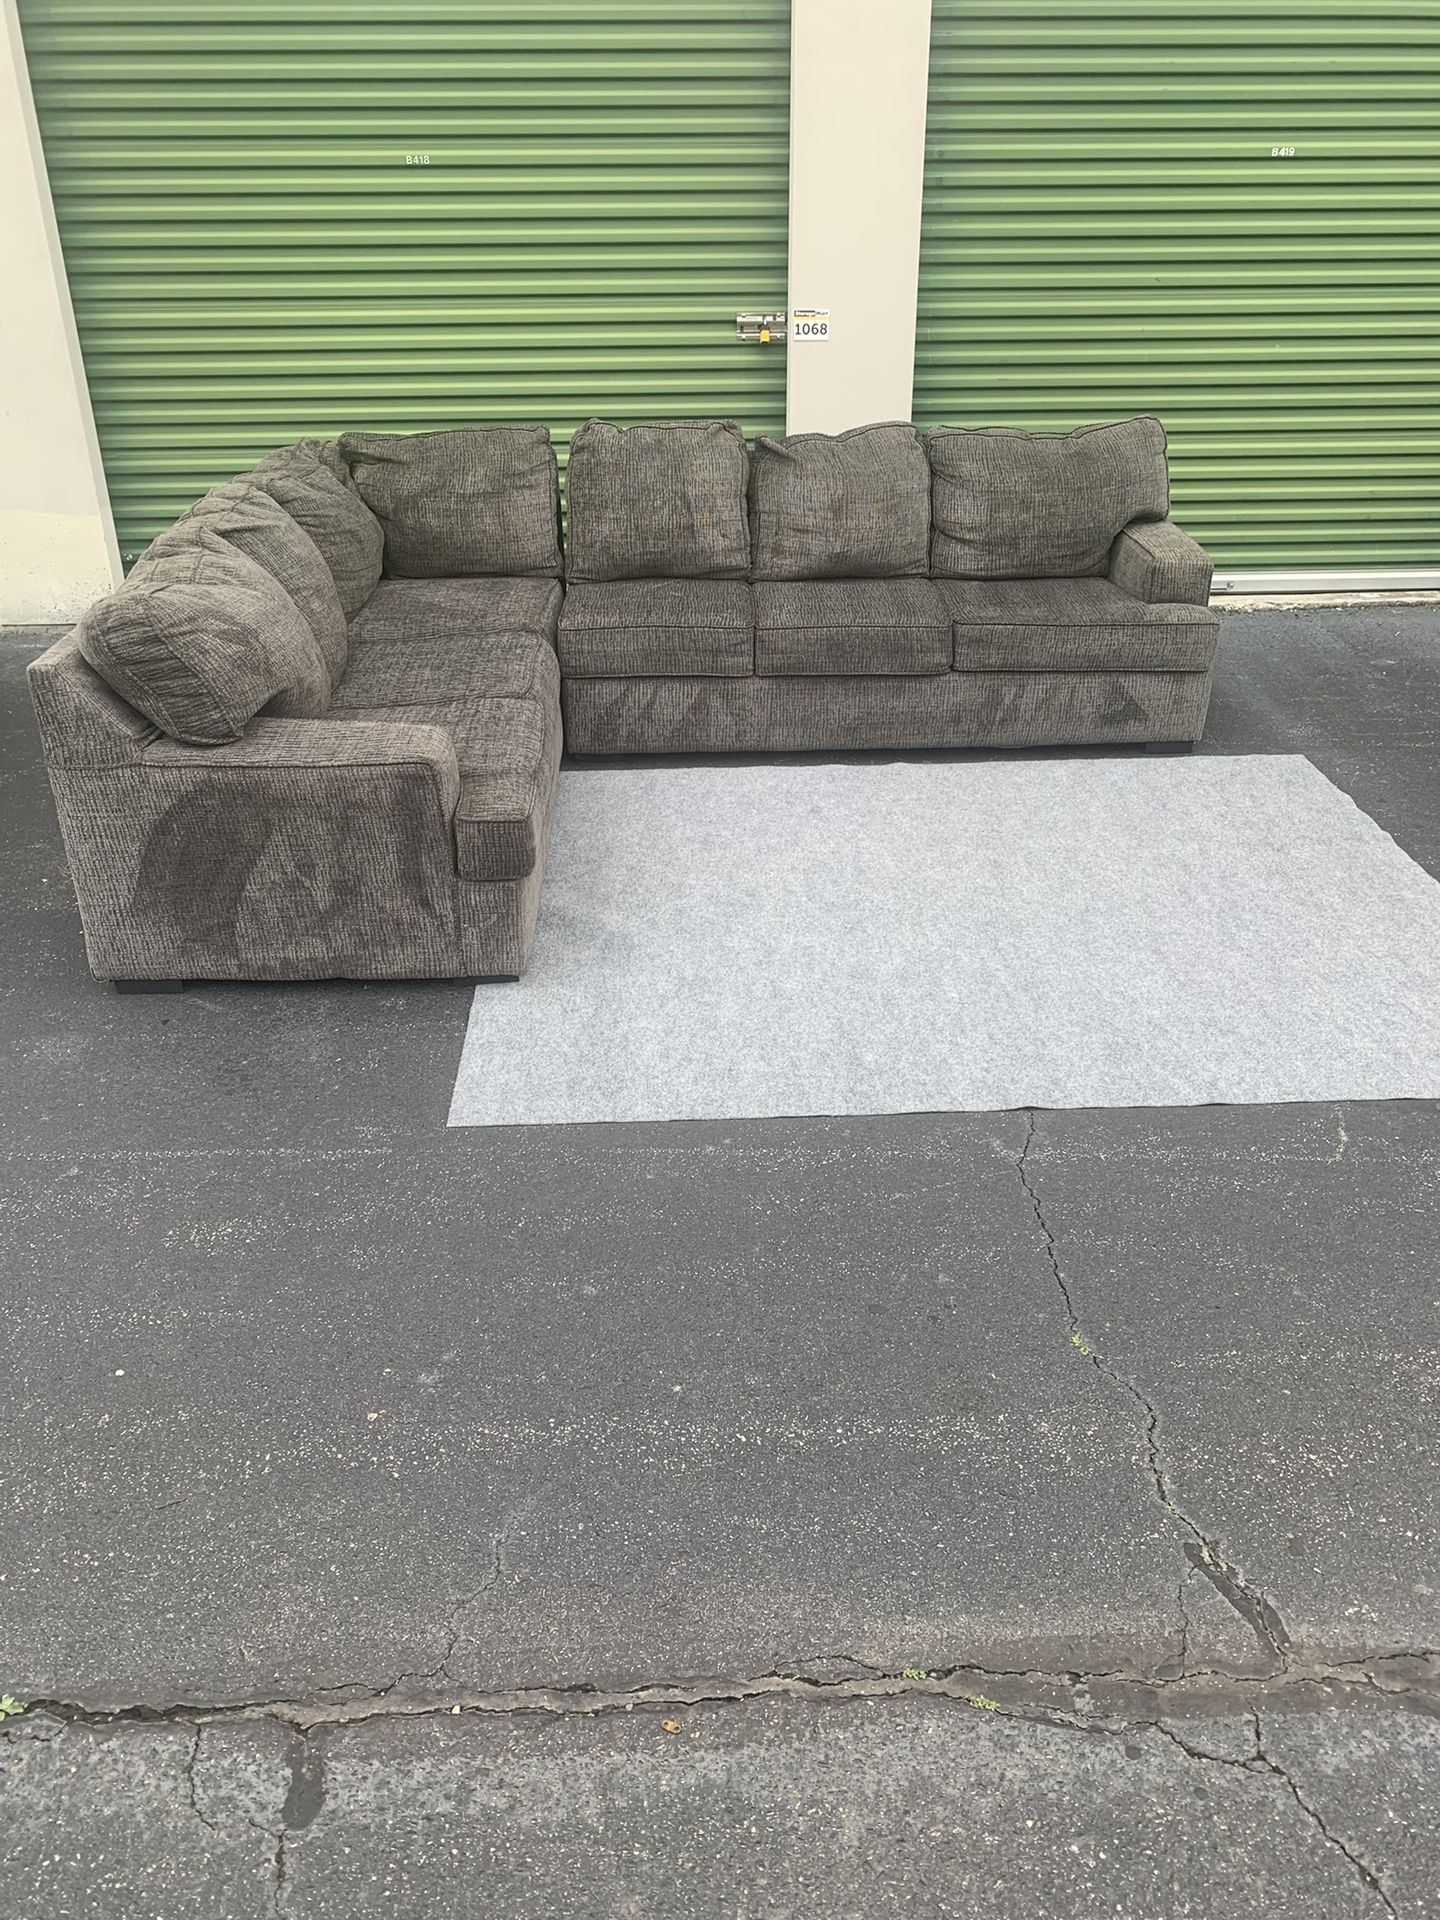 Ashley Grey 2 Piece Sectional Couch Free Delivery 🚚 💨